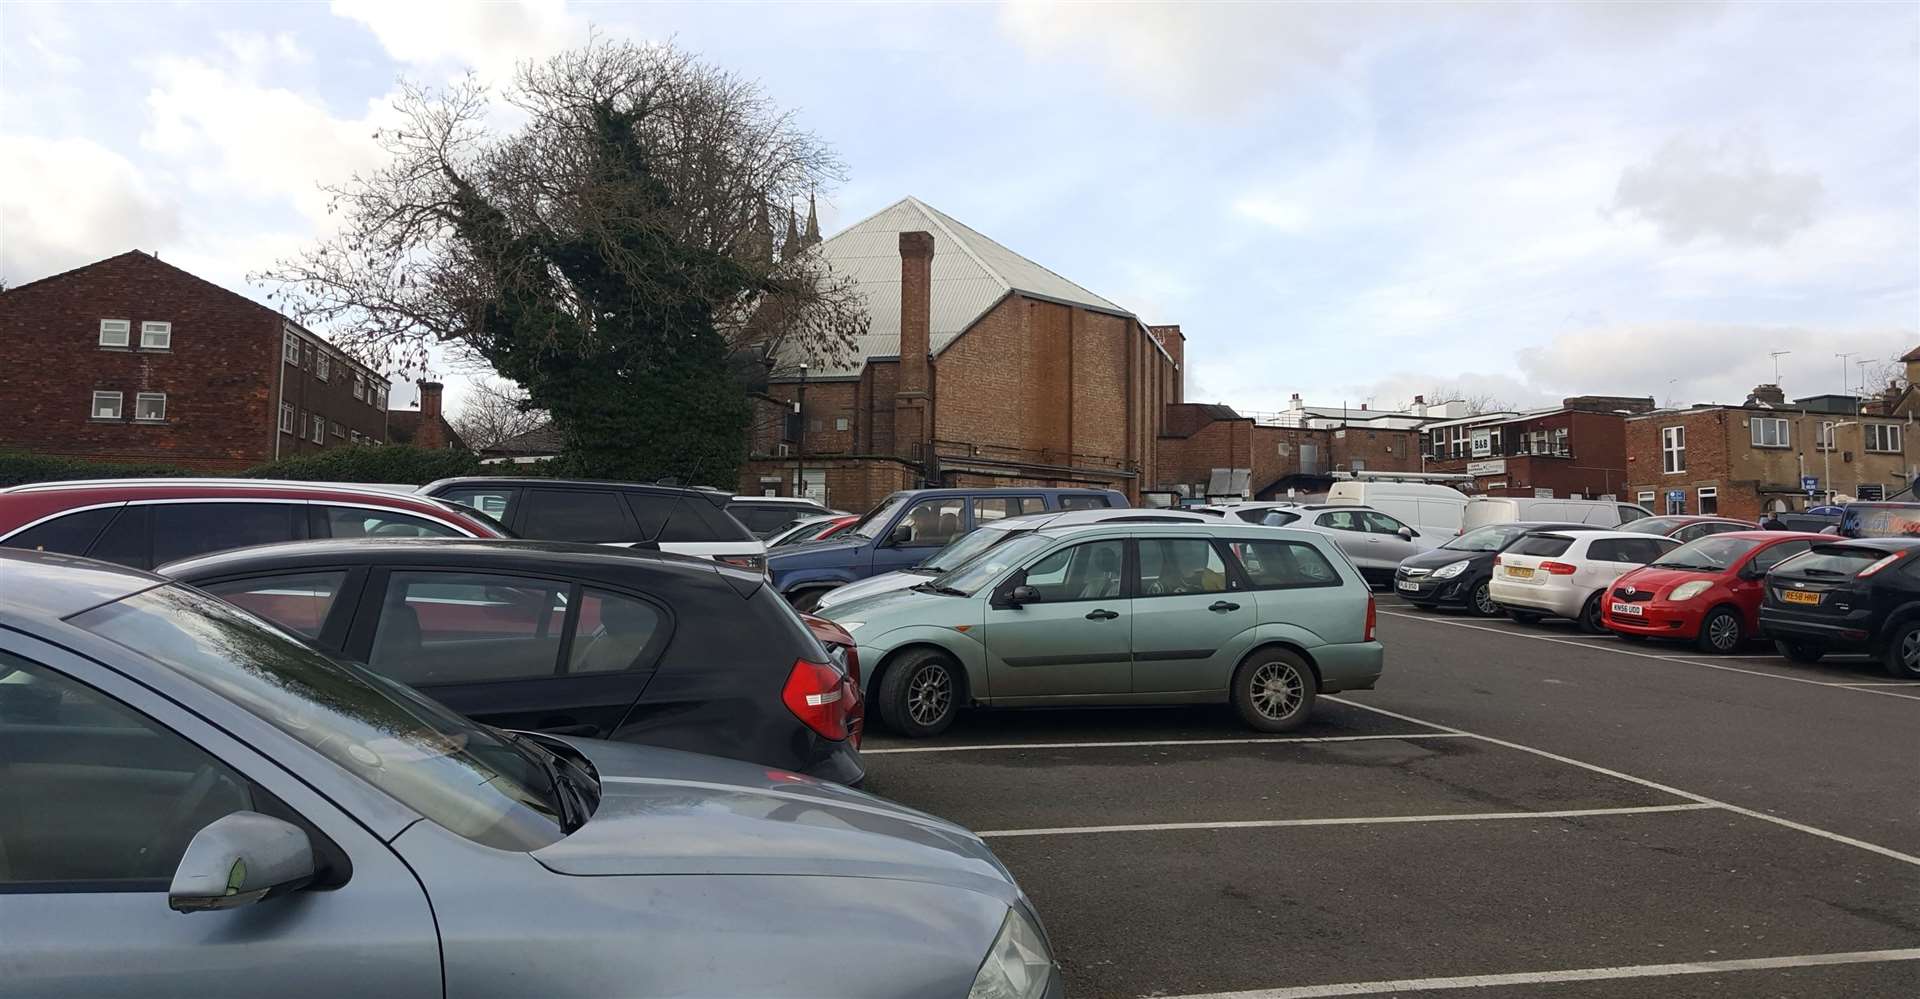 The Vicarage Lane car park will now be retained